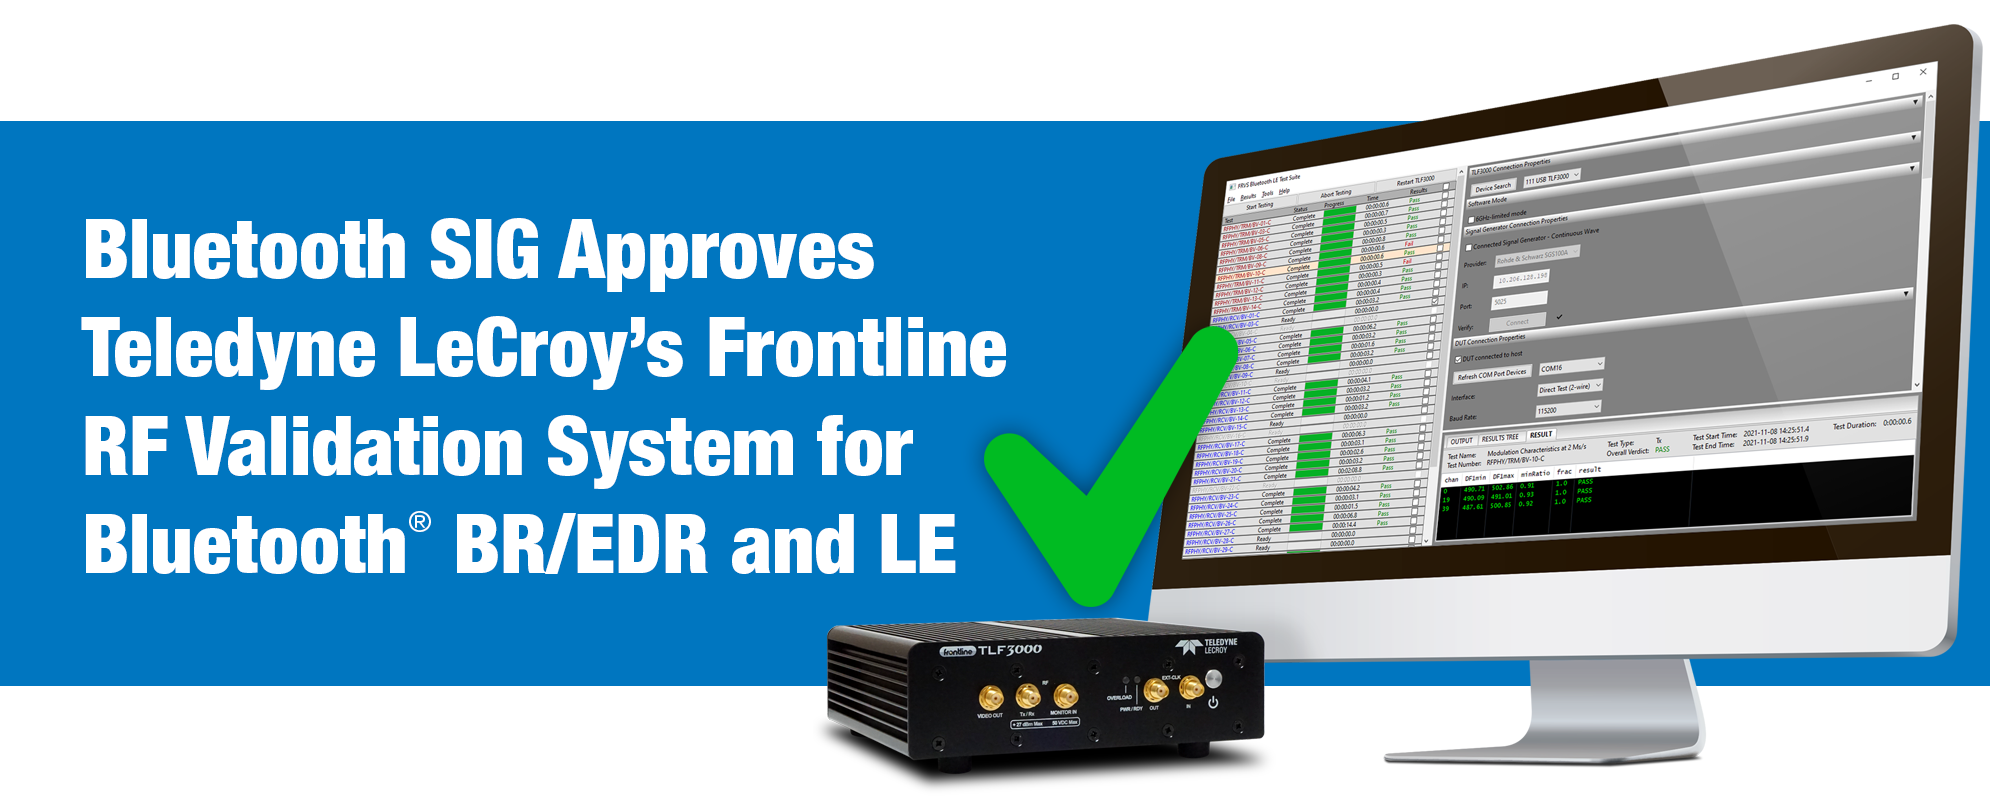 Frontline FRVS Test System Approved By Bluetooth SIG